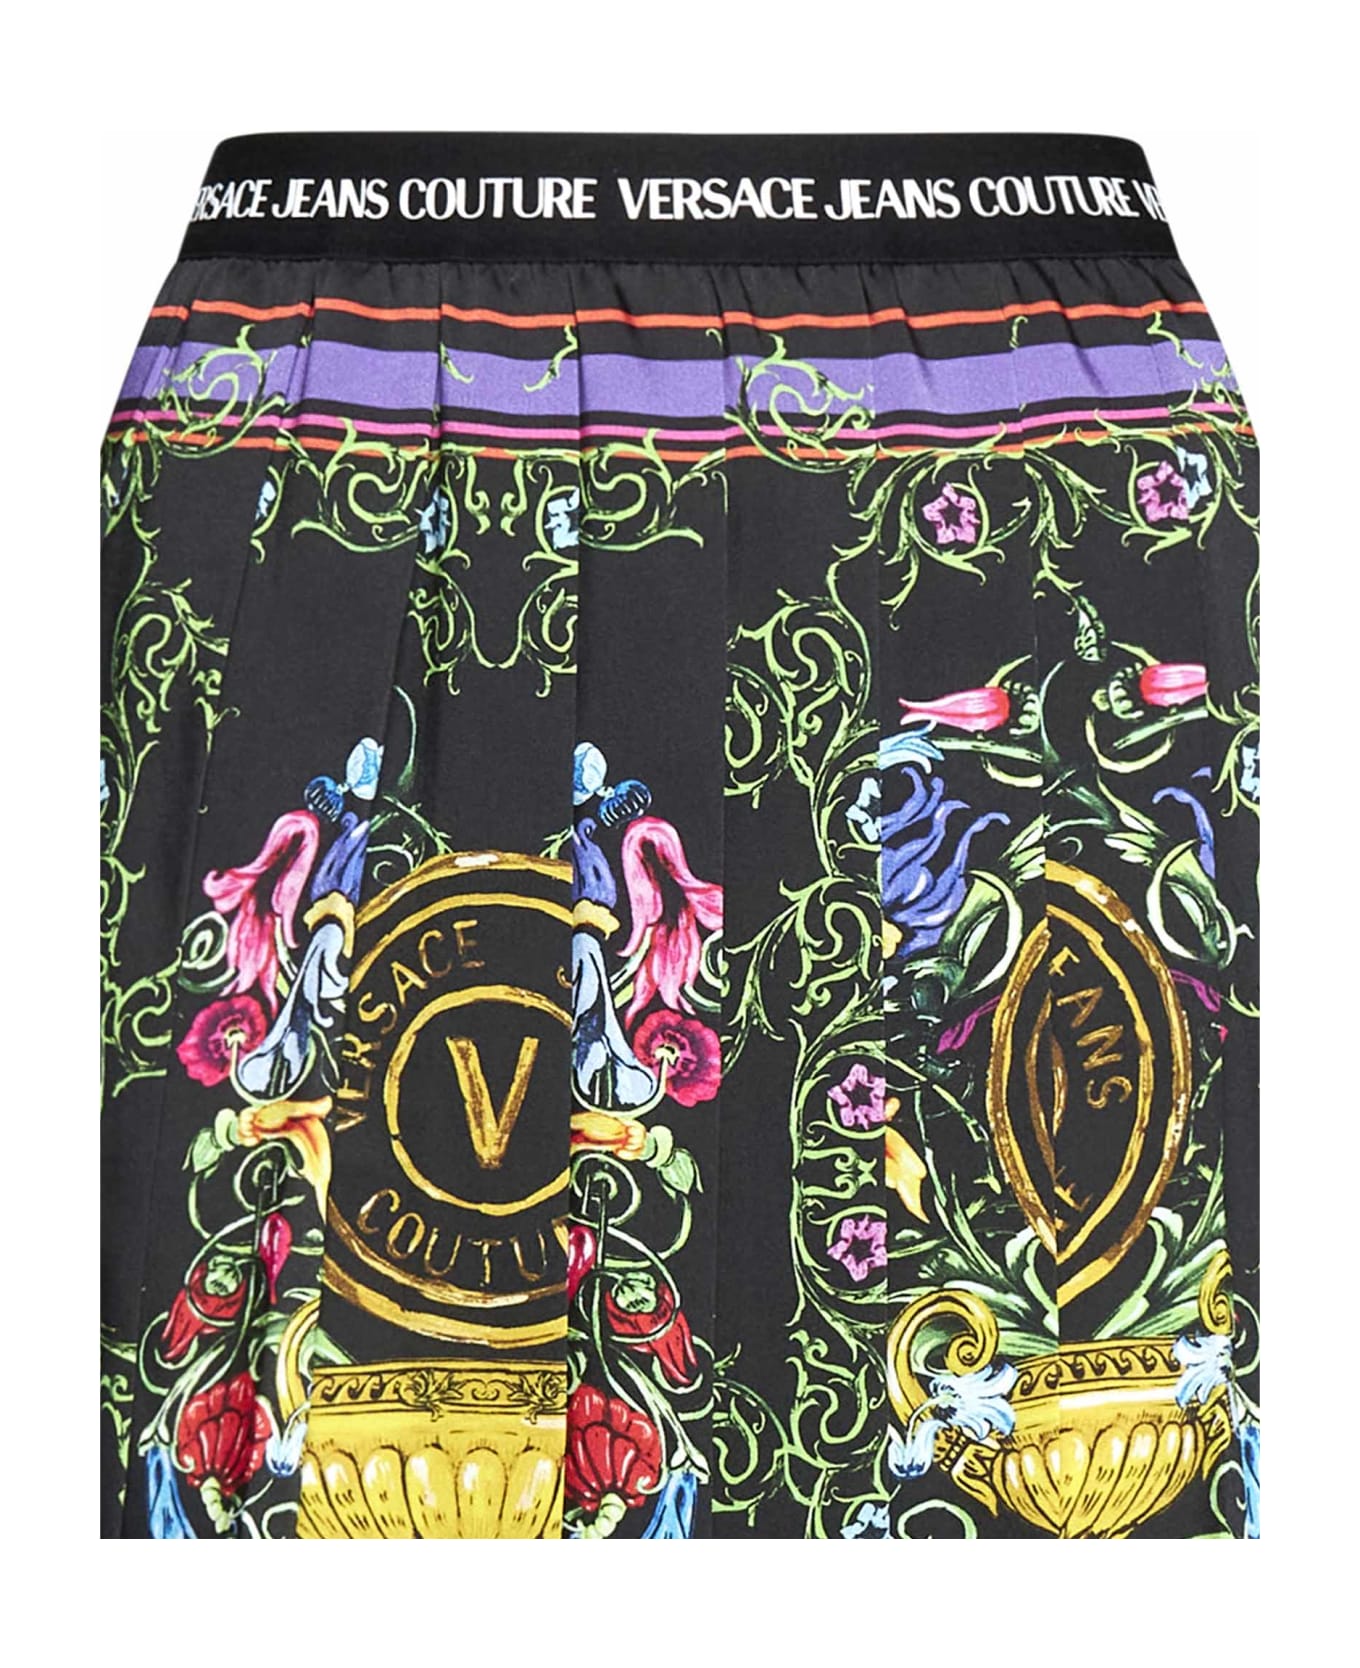 Versace Jeans Couture Skirt - Black